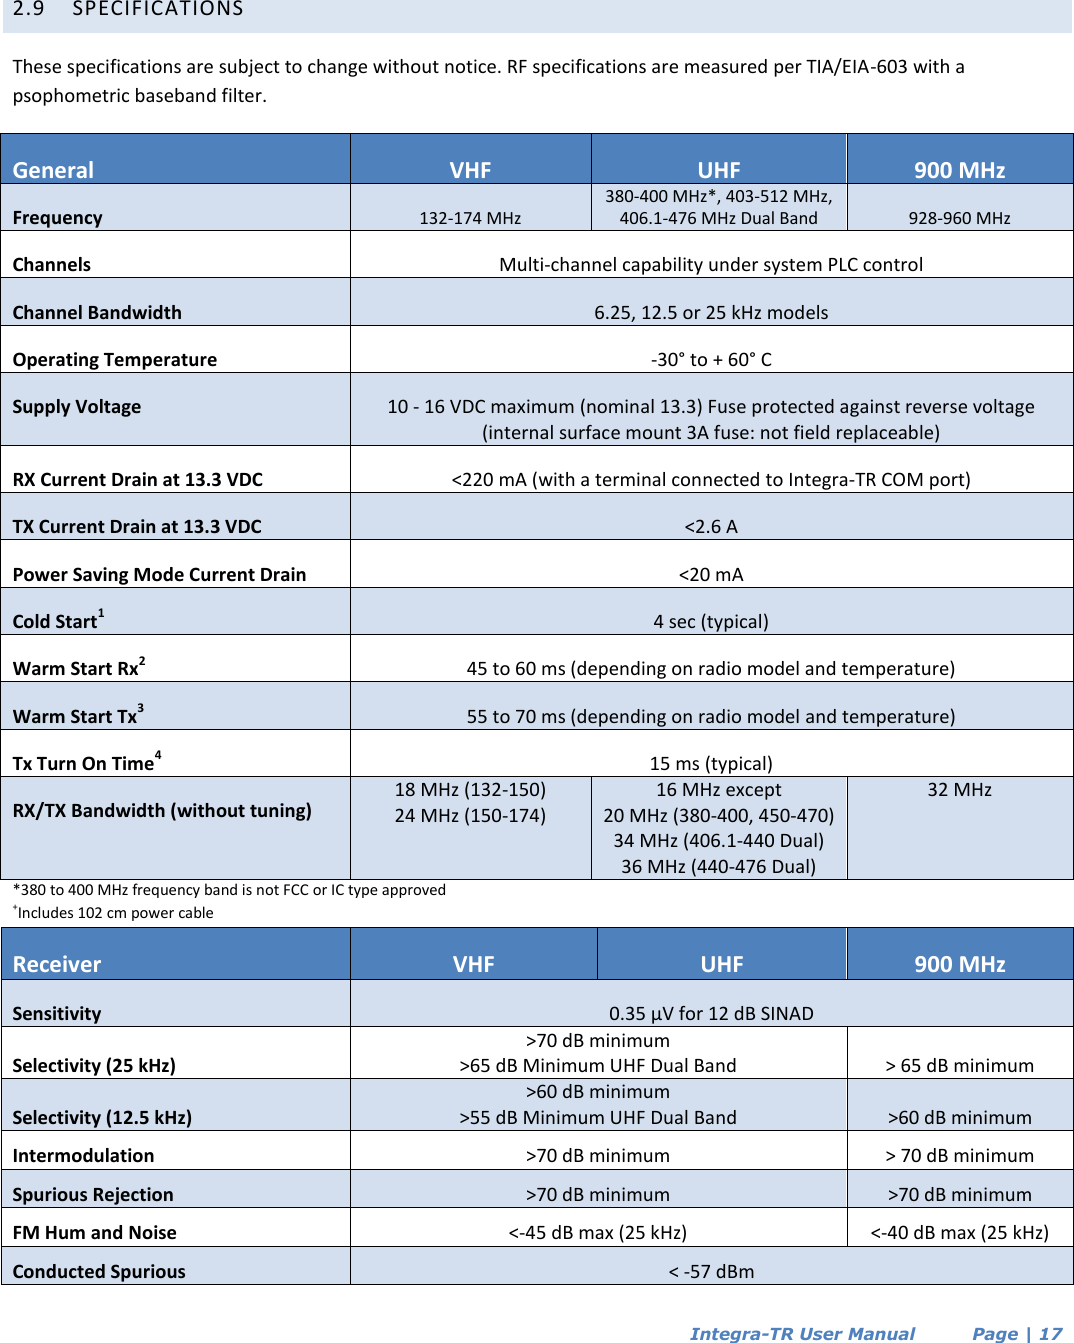  Integra-TR User Manual          Page | 17    2.9 SPECIFICATIONS These specifications are subject to change without notice. RF specifications are measured per TIA/EIA-603 with a psophometric baseband filter. General VHF UHF 900 MHz Frequency 132-174 MHz 380-400 MHz*, 403-512 MHz, 406.1-476 MHz Dual Band 928-960 MHz Channels Multi-channel capability under system PLC control Channel Bandwidth 6.25, 12.5 or 25 kHz models Operating Temperature -30° to + 60° C Supply Voltage 10 - 16 VDC maximum (nominal 13.3) Fuse protected against reverse voltage (internal surface mount 3A fuse: not field replaceable) RX Current Drain at 13.3 VDC &lt;220 mA (with a terminal connected to Integra-TR COM port) TX Current Drain at 13.3 VDC &lt;2.6 A Power Saving Mode Current Drain &lt;20 mA Cold Start1 4 sec (typical) Warm Start Rx2 45 to 60 ms (depending on radio model and temperature) Warm Start Tx3 55 to 70 ms (depending on radio model and temperature) Tx Turn On Time4 15 ms (typical) RX/TX Bandwidth (without tuning) 18 MHz (132-150) 24 MHz (150-174) 16 MHz except 20 MHz (380-400, 450-470) 34 MHz (406.1-440 Dual) 36 MHz (440-476 Dual) 32 MHz *380 to 400 MHz frequency band is not FCC or IC type approved +Includes 102 cm power cable Receiver VHF UHF 900 MHz Sensitivity 0.35 µV for 12 dB SINAD Selectivity (25 kHz)  &gt;70 dB minimum &gt;65 dB Minimum UHF Dual Band &gt; 65 dB minimum Selectivity (12.5 kHz) &gt;60 dB minimum &gt;55 dB Minimum UHF Dual Band &gt;60 dB minimum Intermodulation  &gt;70 dB minimum &gt; 70 dB minimum Spurious Rejection &gt;70 dB minimum &gt;70 dB minimum FM Hum and Noise  &lt;-45 dB max (25 kHz) &lt;-40 dB max (25 kHz) Conducted Spurious  &lt; -57 dBm 